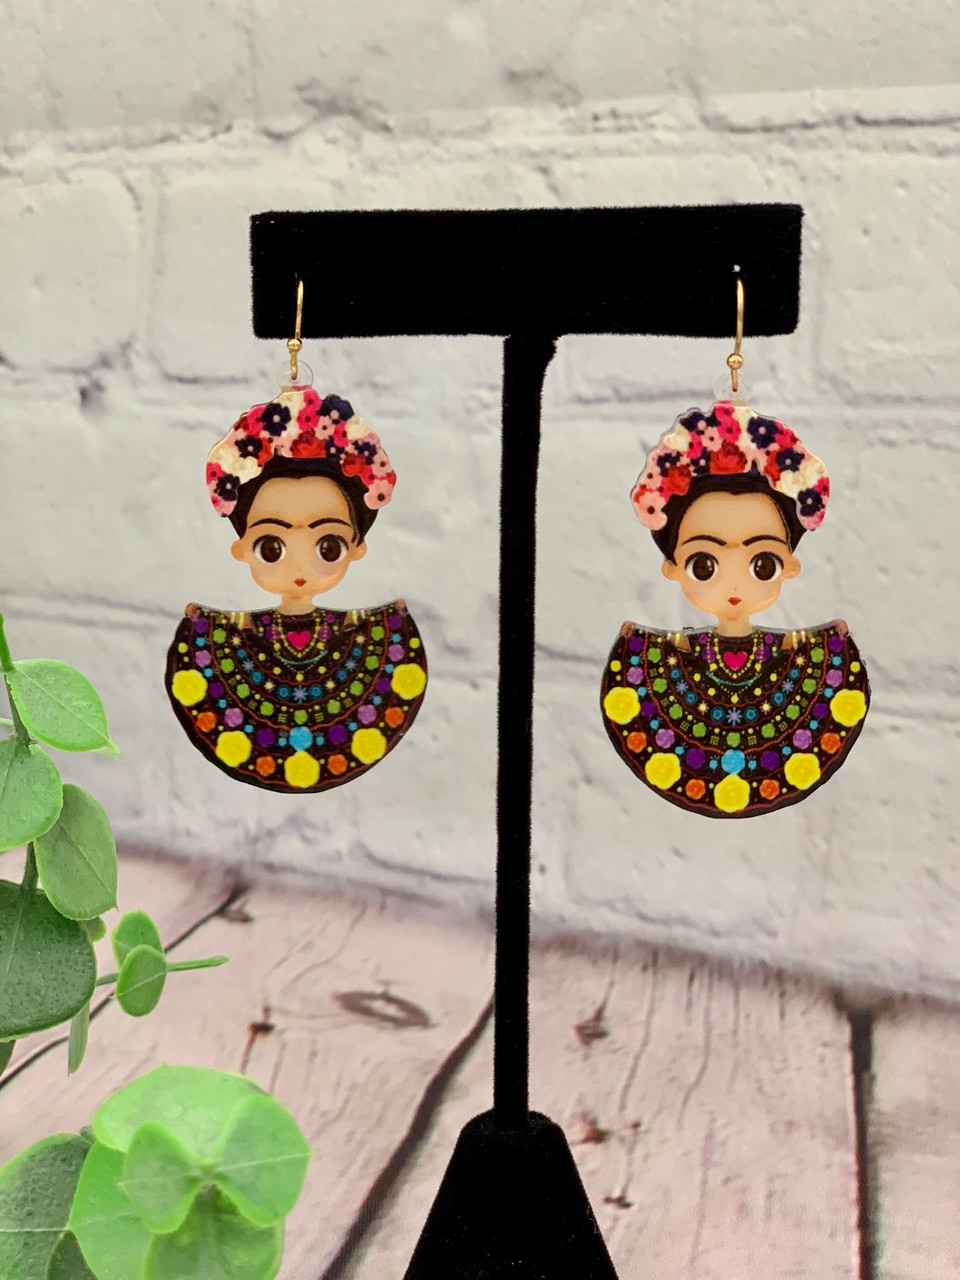 Frida Kahlo Cartoon Multicolor Earrings - Vibrant Hand-Painted Accessories Inspired by The Iconic Mexican Artist